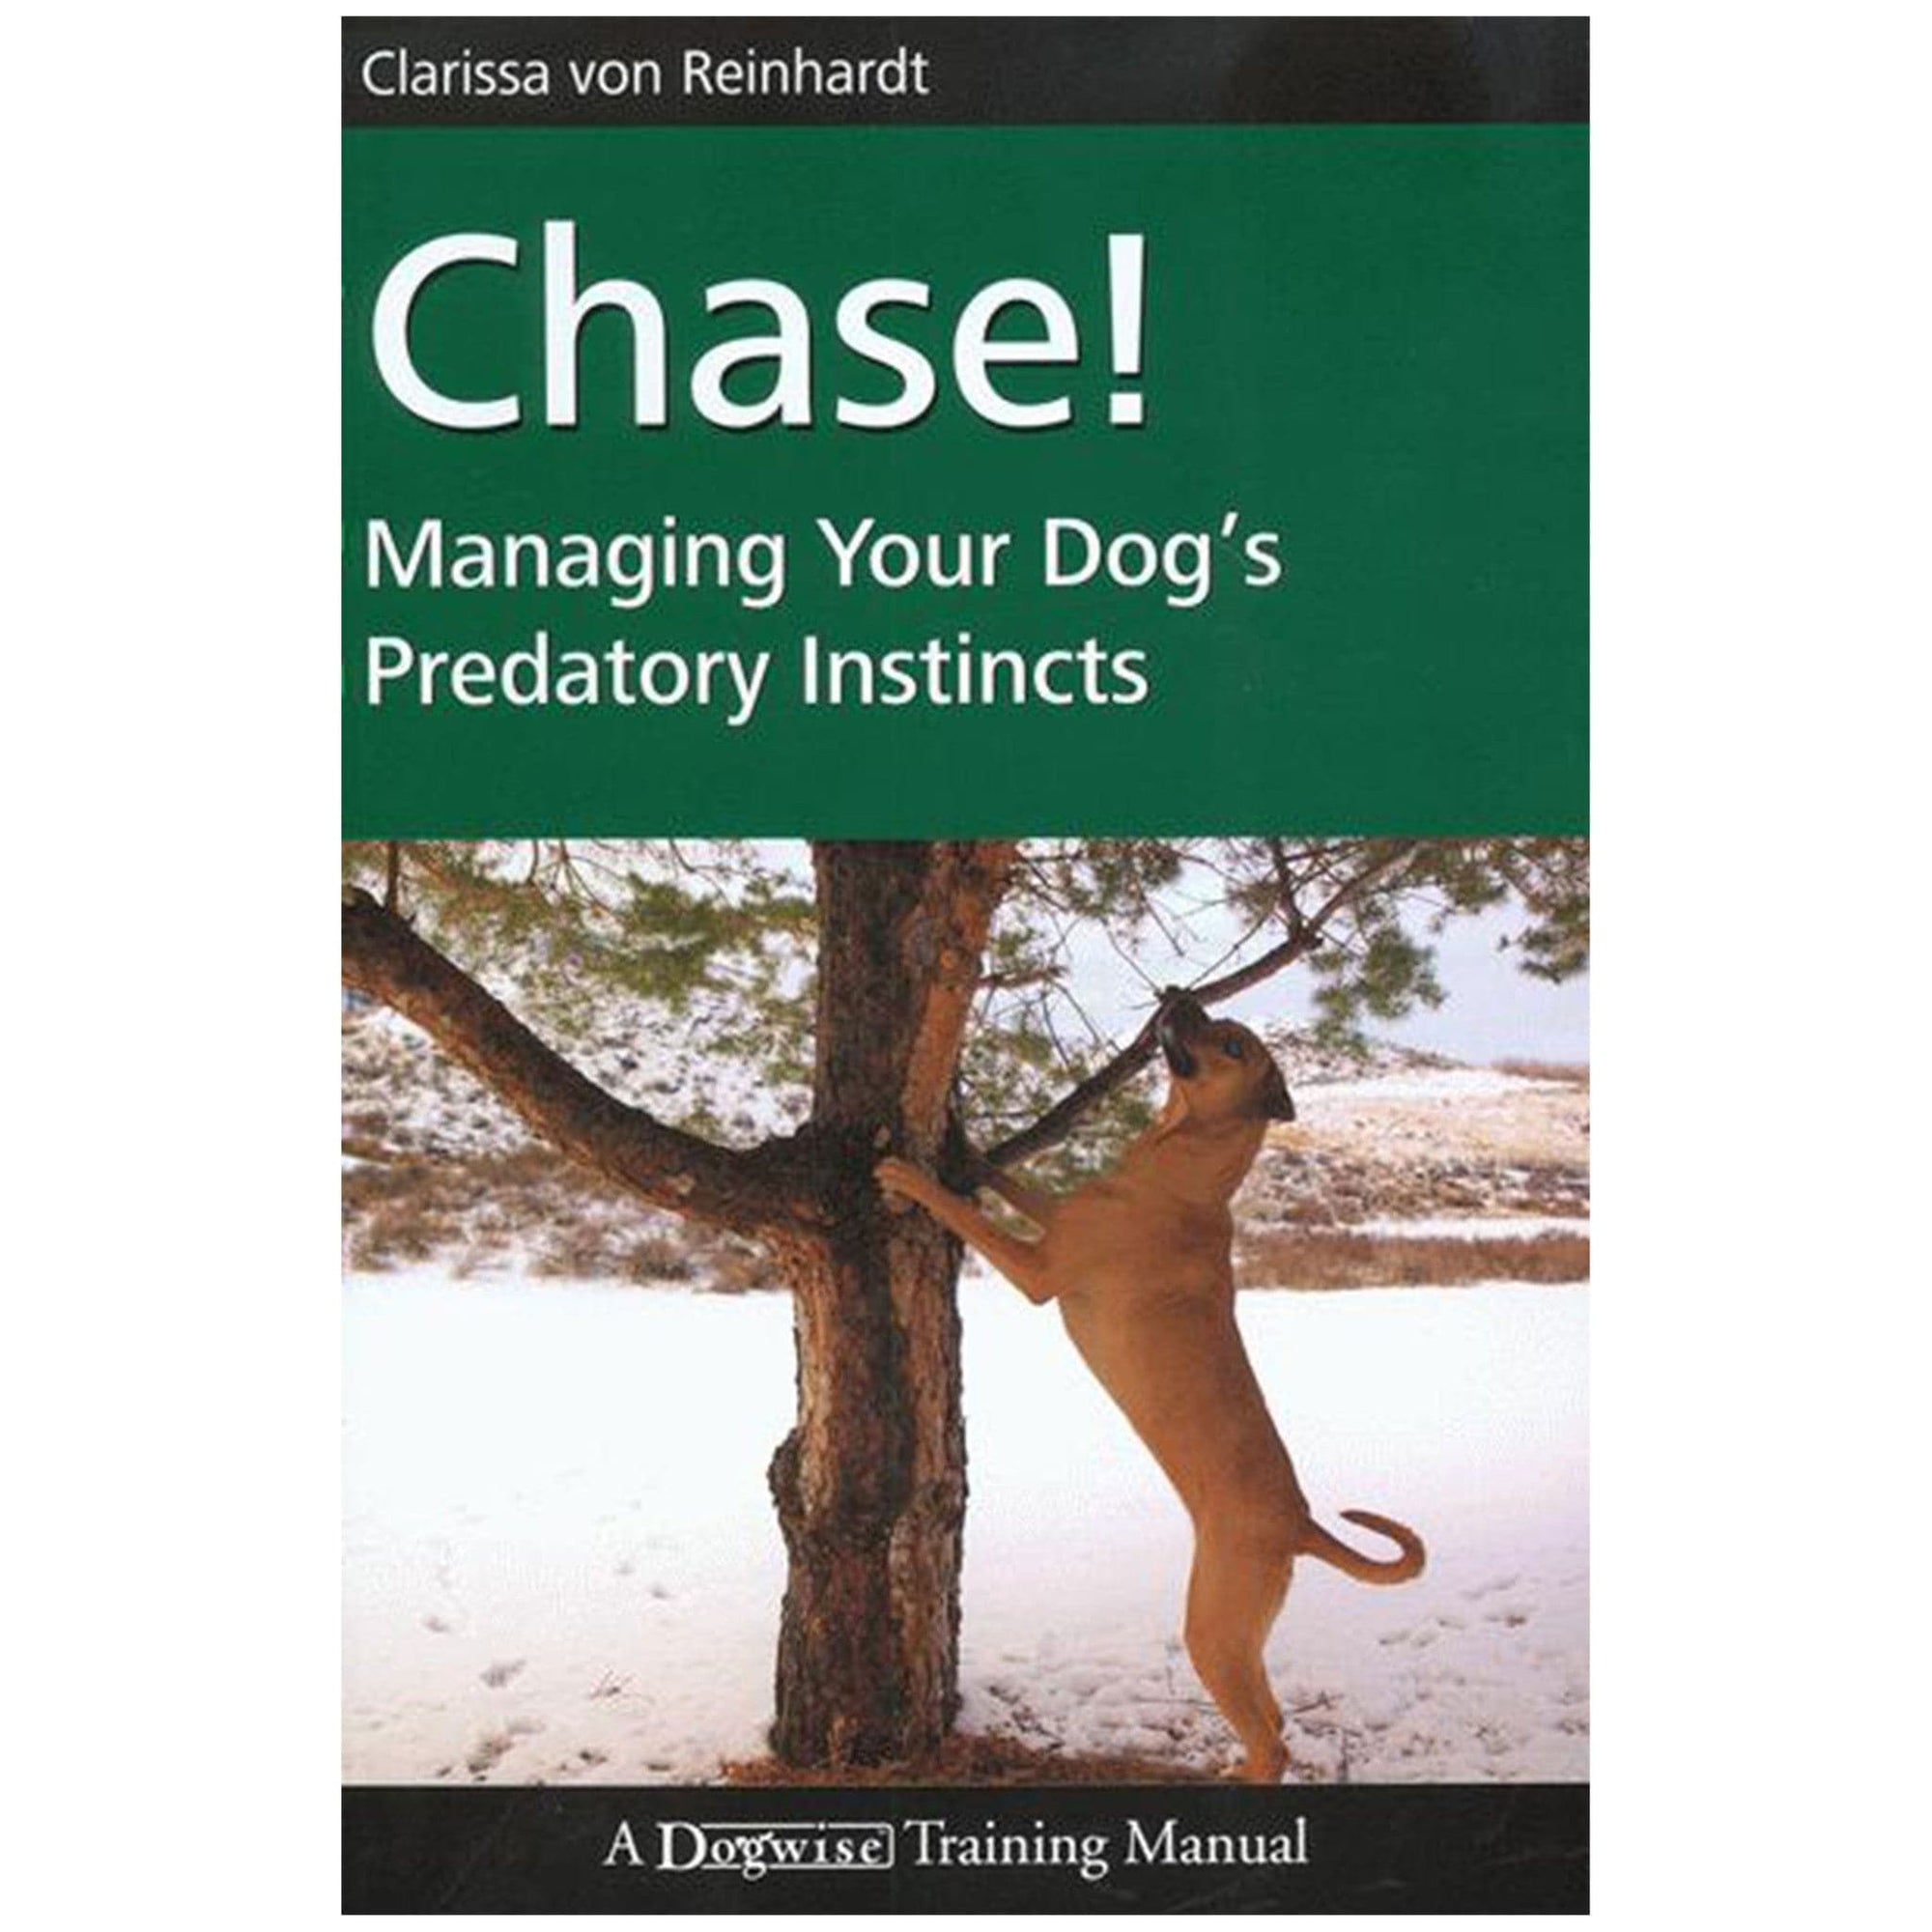 Chase! Managing Your Dog’s Predatory Instincts   e-book